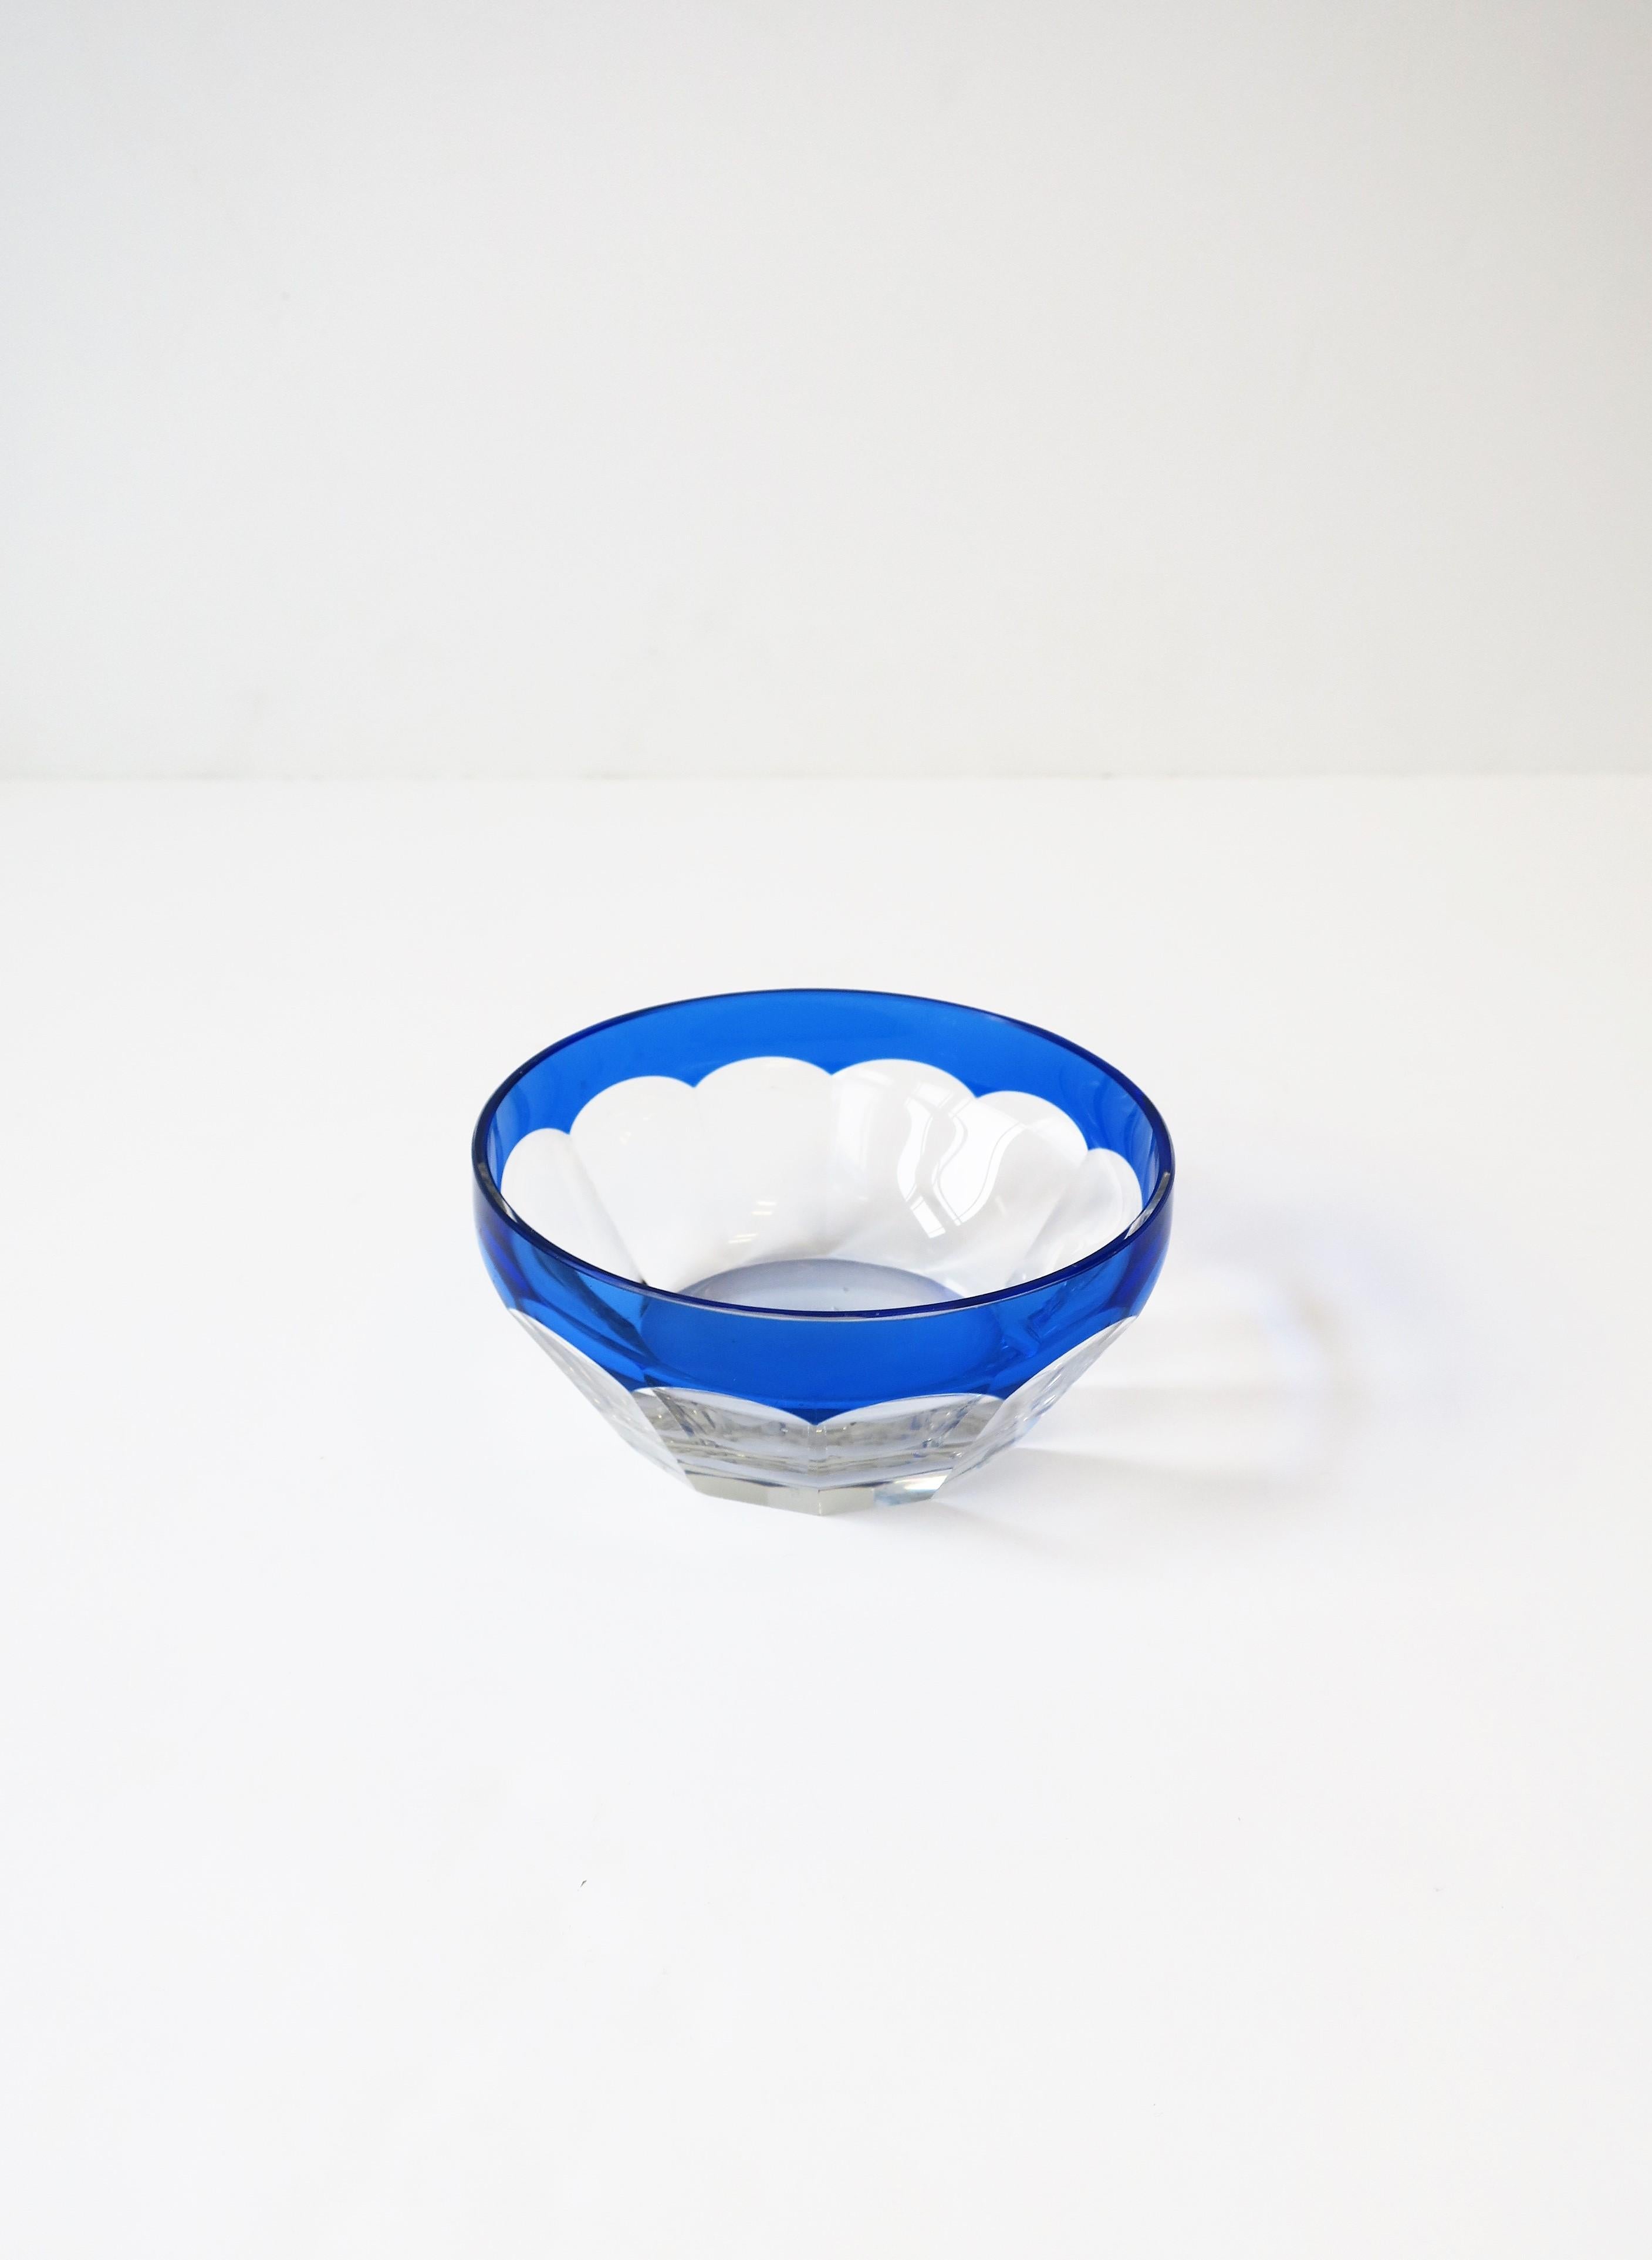 Contemporary European Cobalt Blue and Clear Crystal Bowl